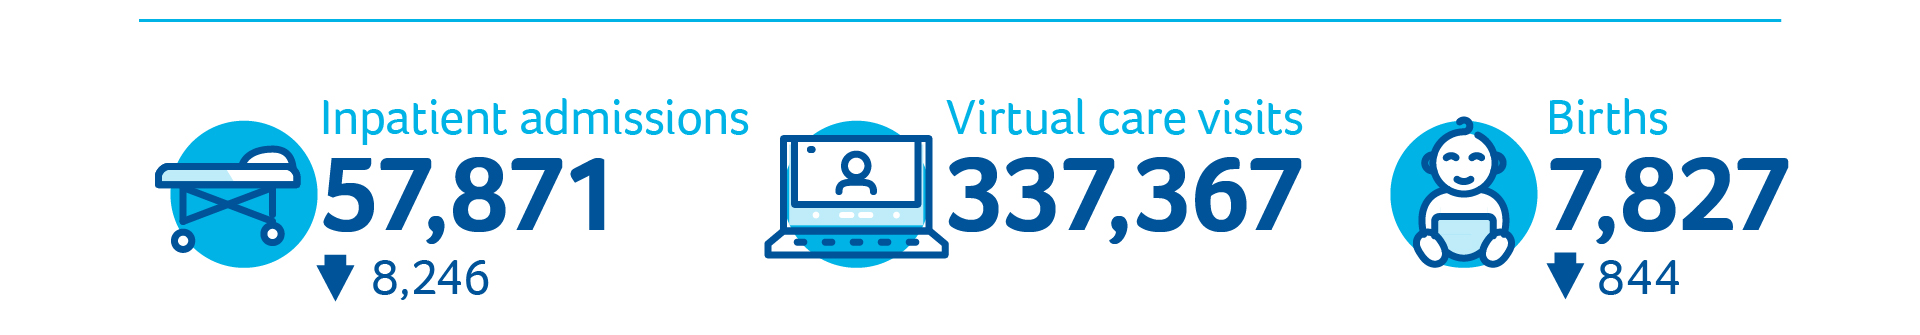 57,871 inpatient admissions (8.246 fewer than last year). 7,827 births (844 fewer than previous year), 337,367 Virtual care visits